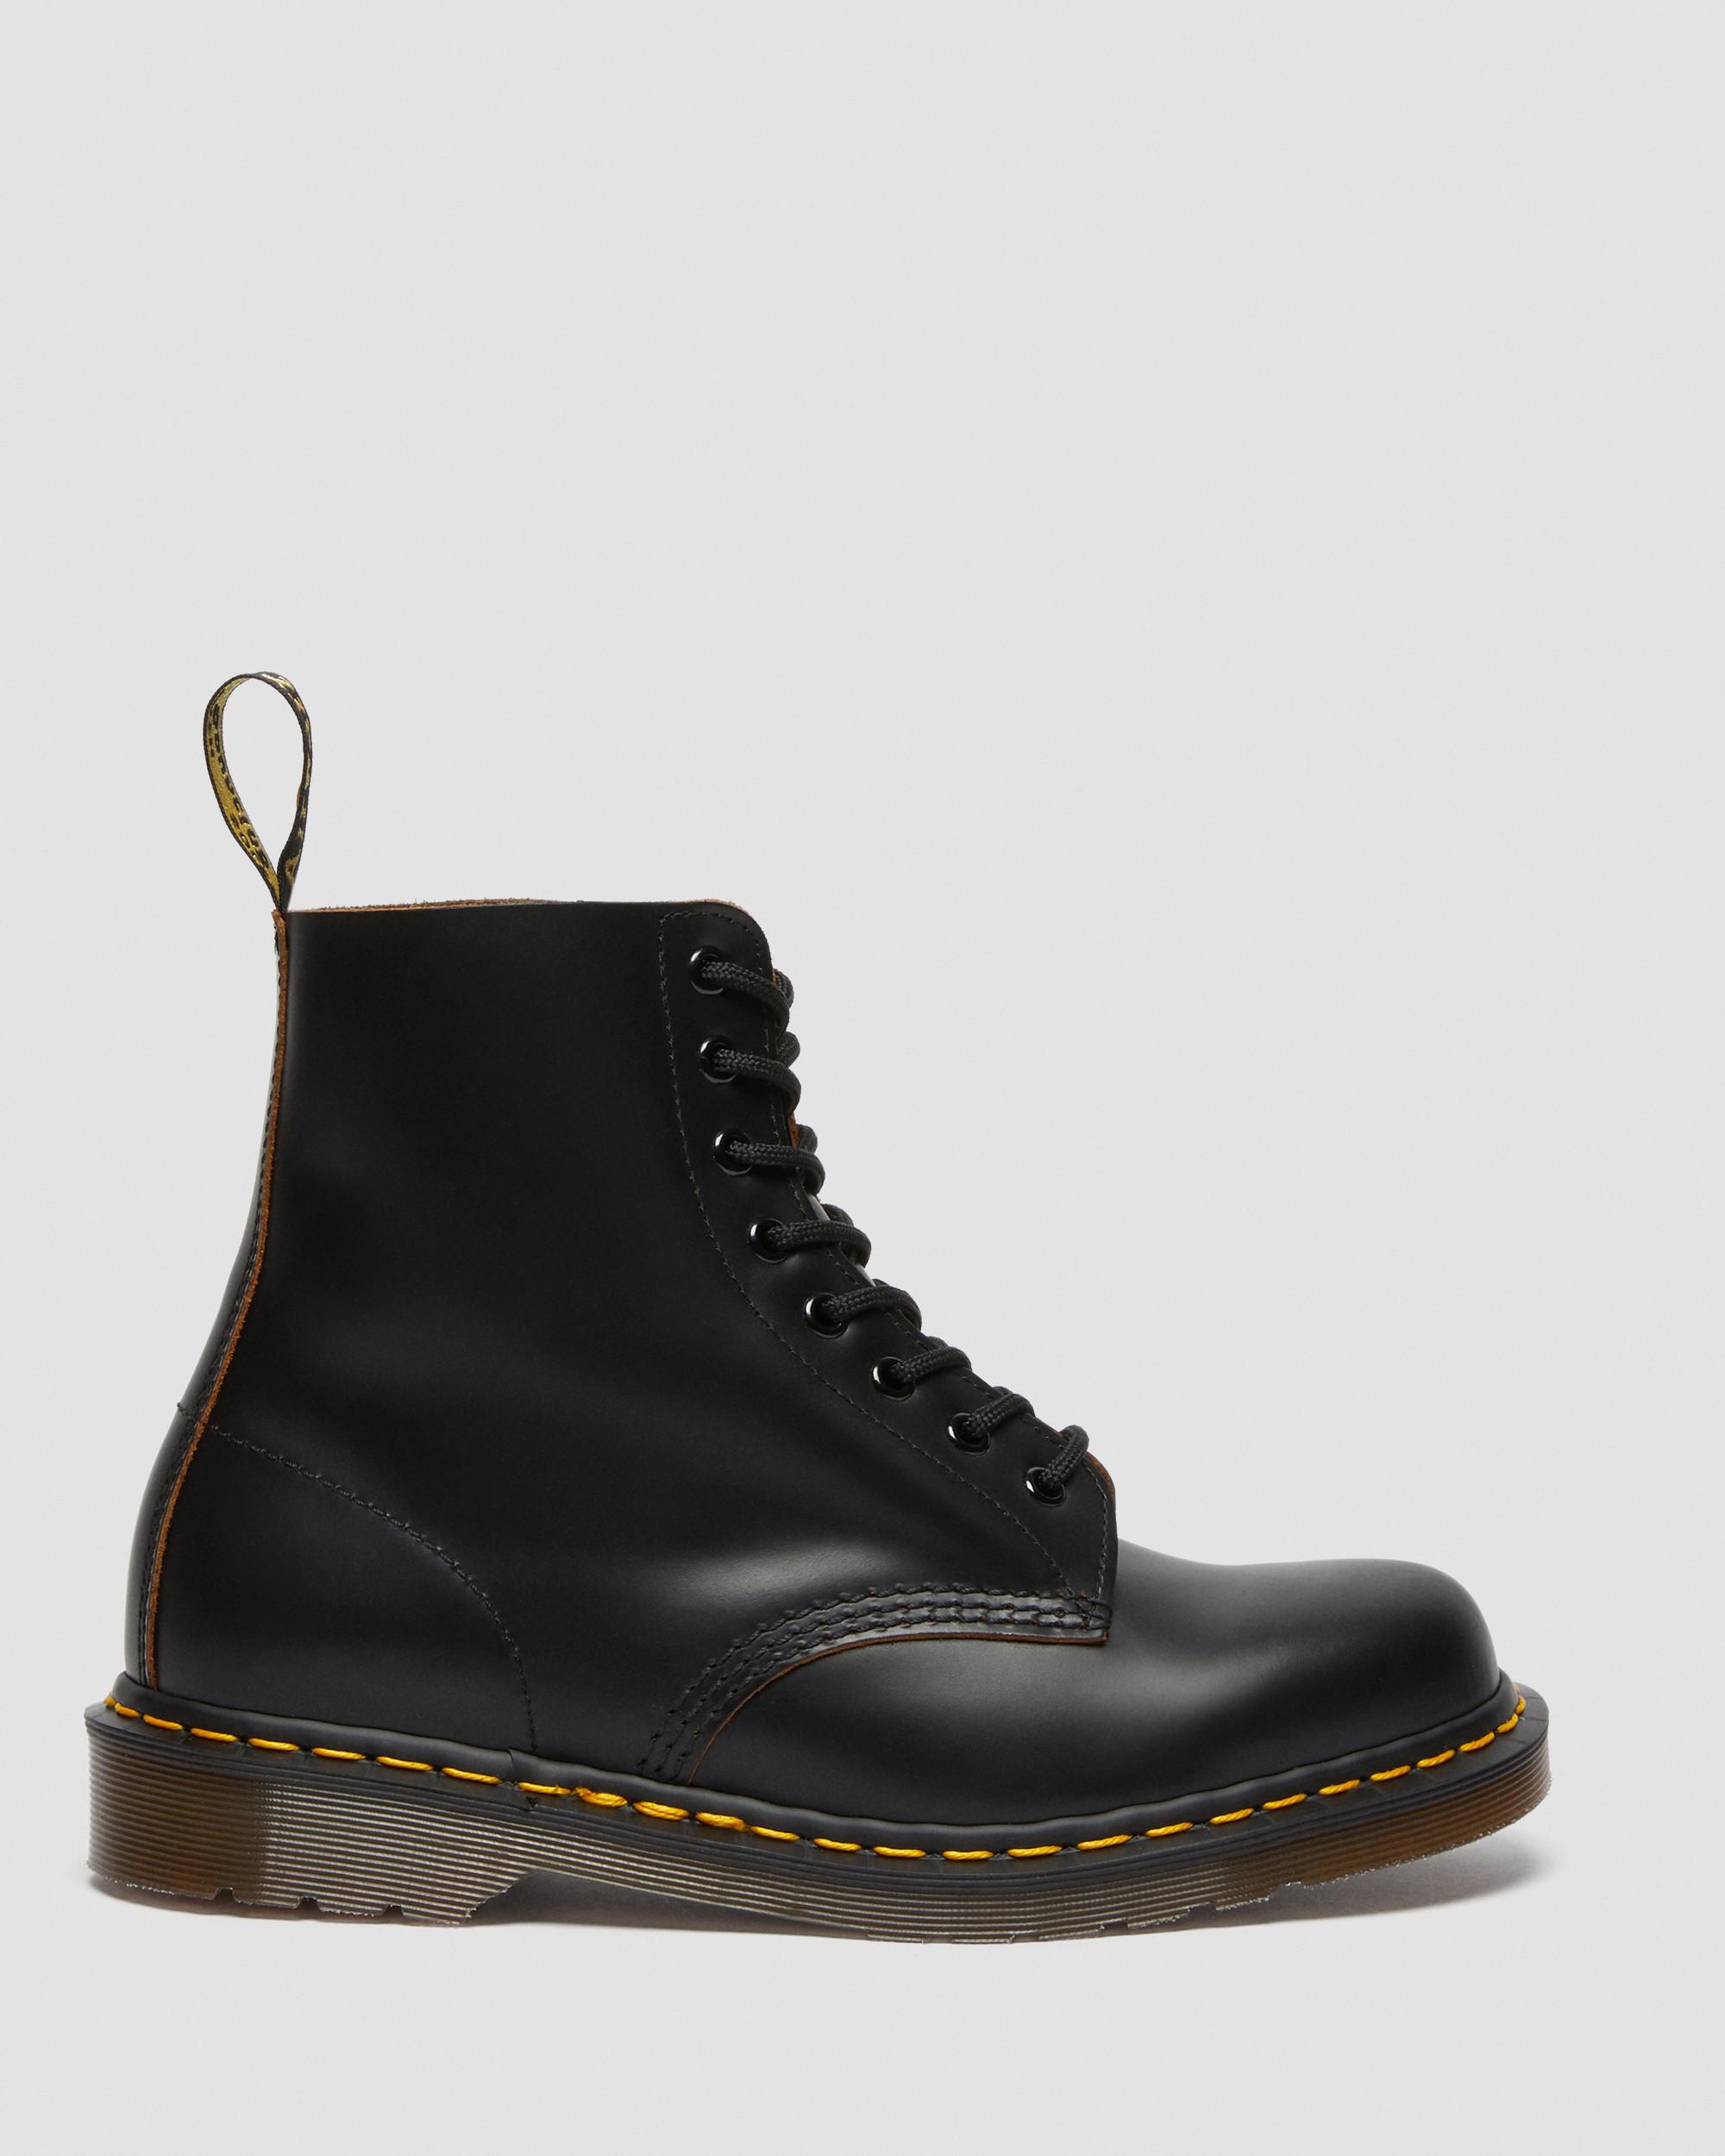 Dr Martens Original 14 Hole Black Boot Laces.Made In England. 